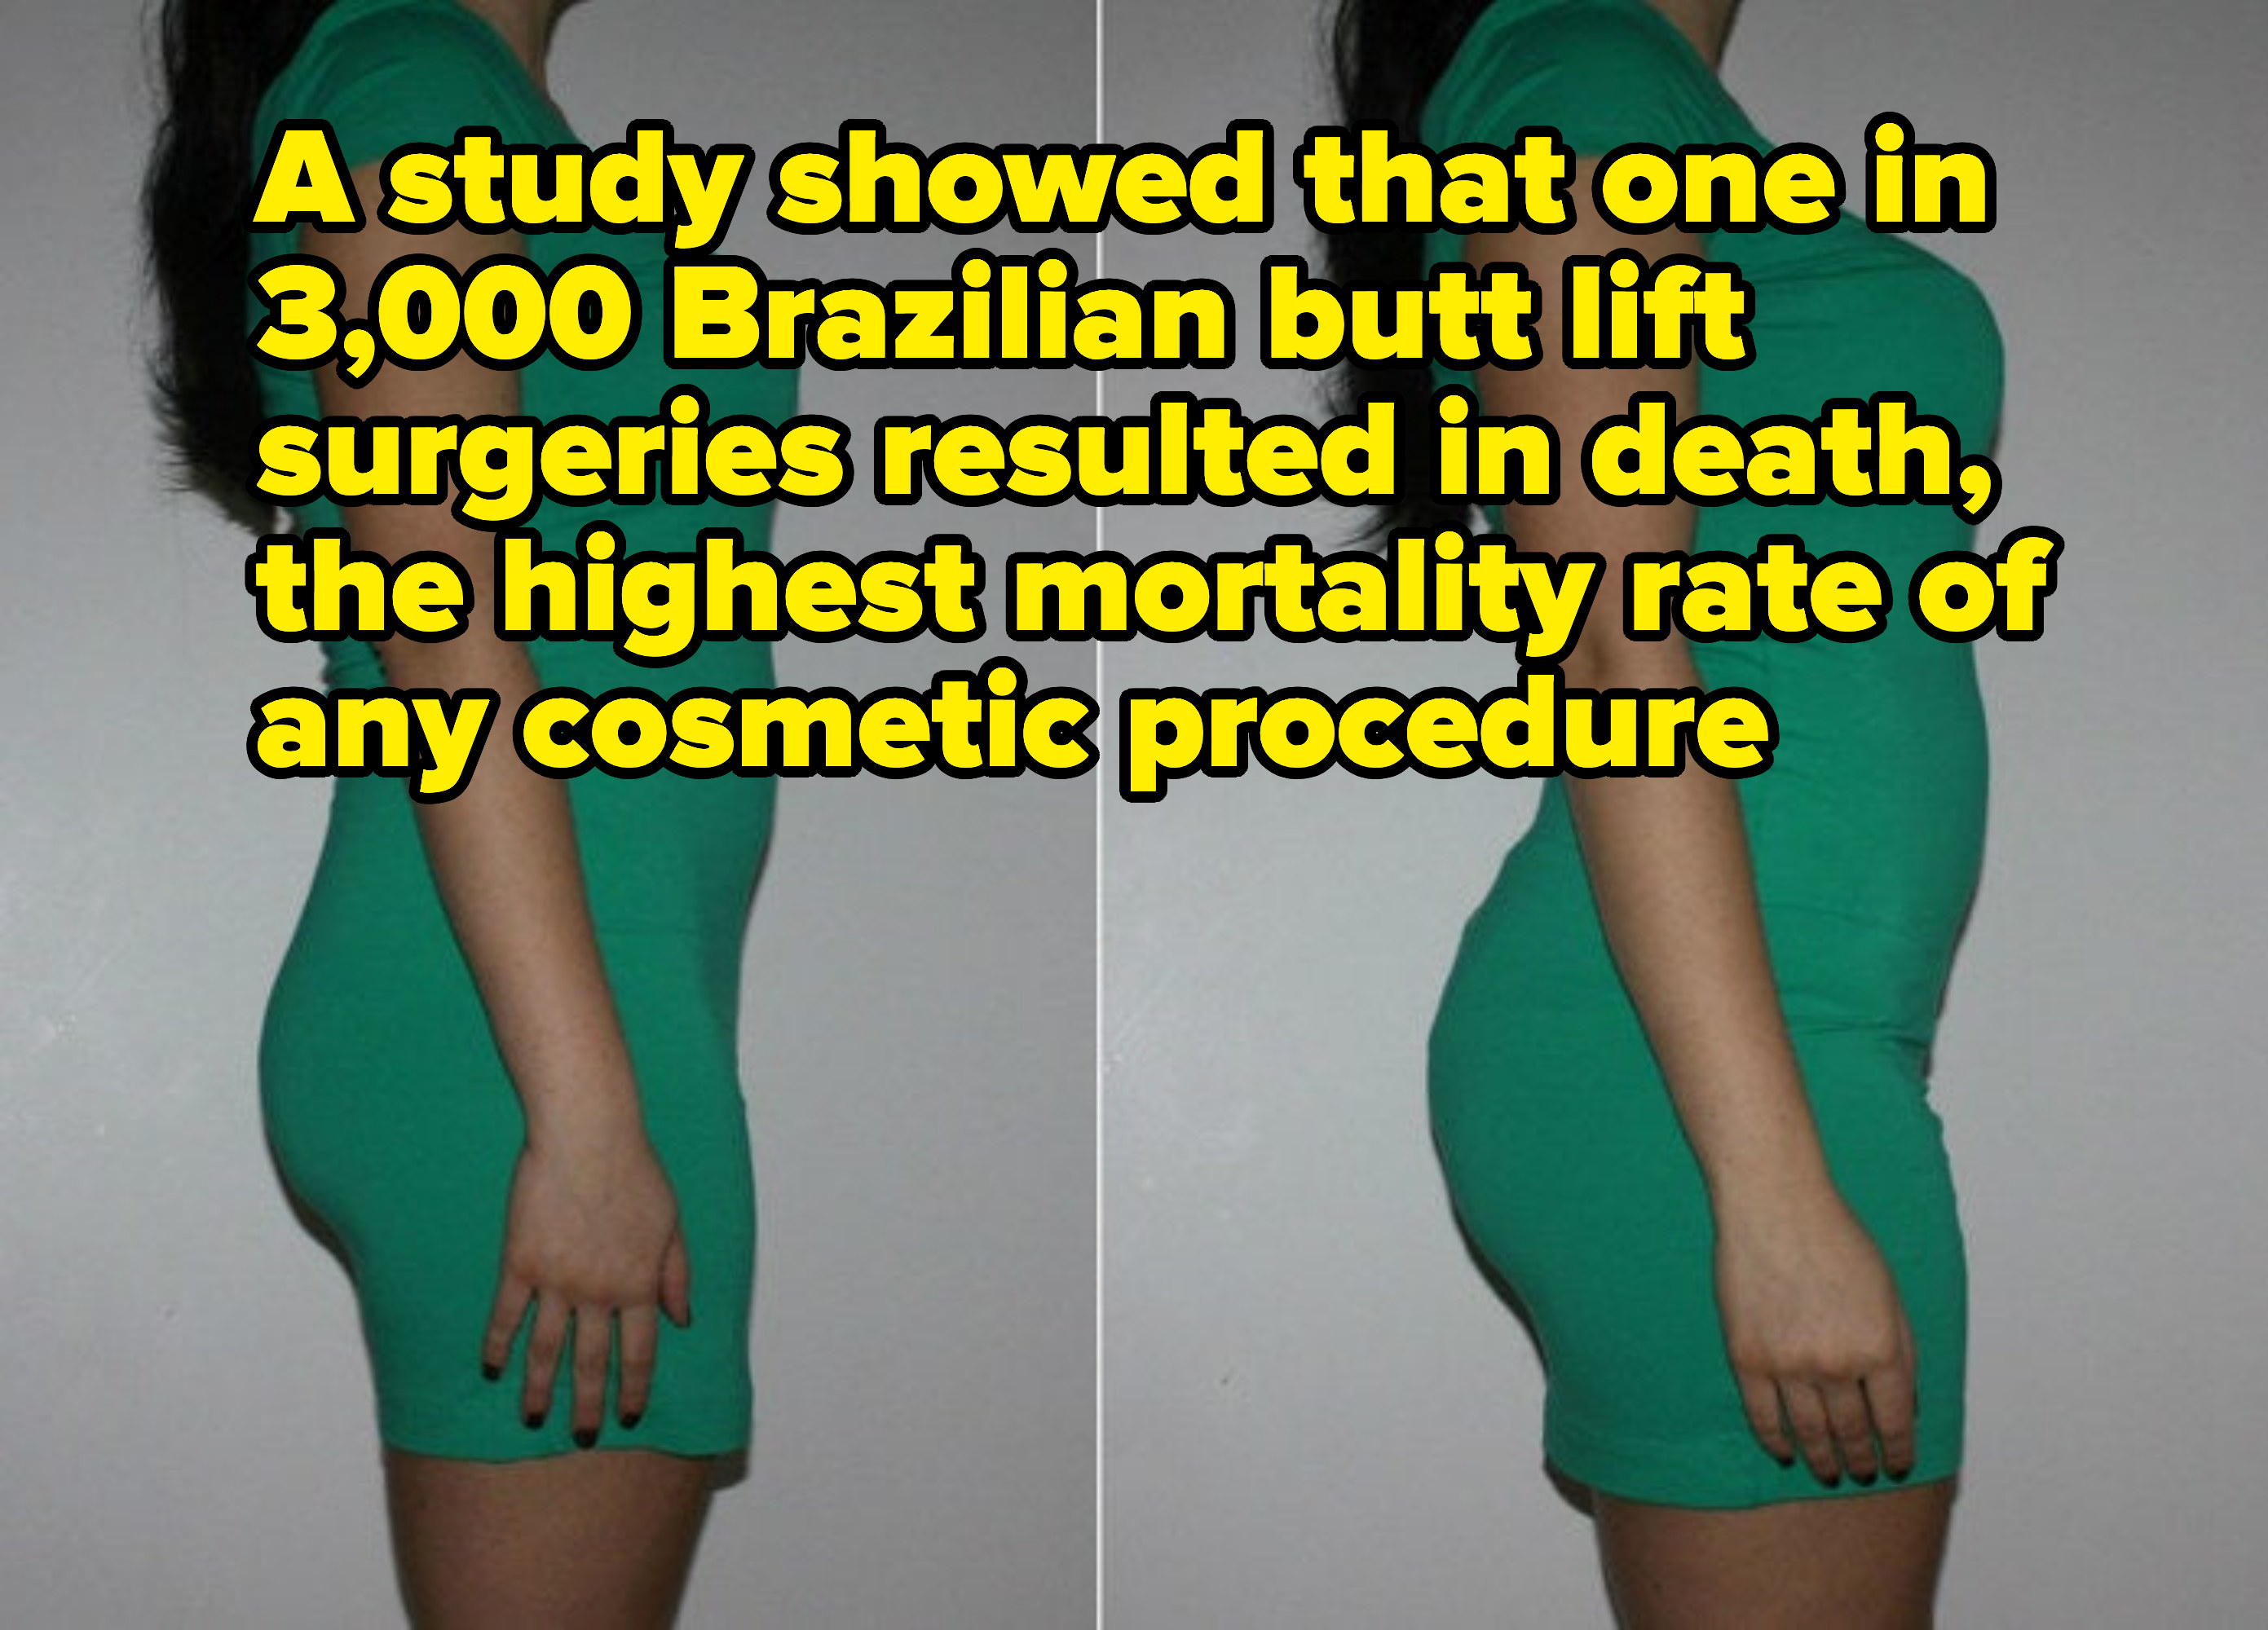 before and after photos with text reading, a study showed that 1 in 3000 brazillian butt lift surgeries resulted in death, the hight mortality rate of any cosmetic procedure